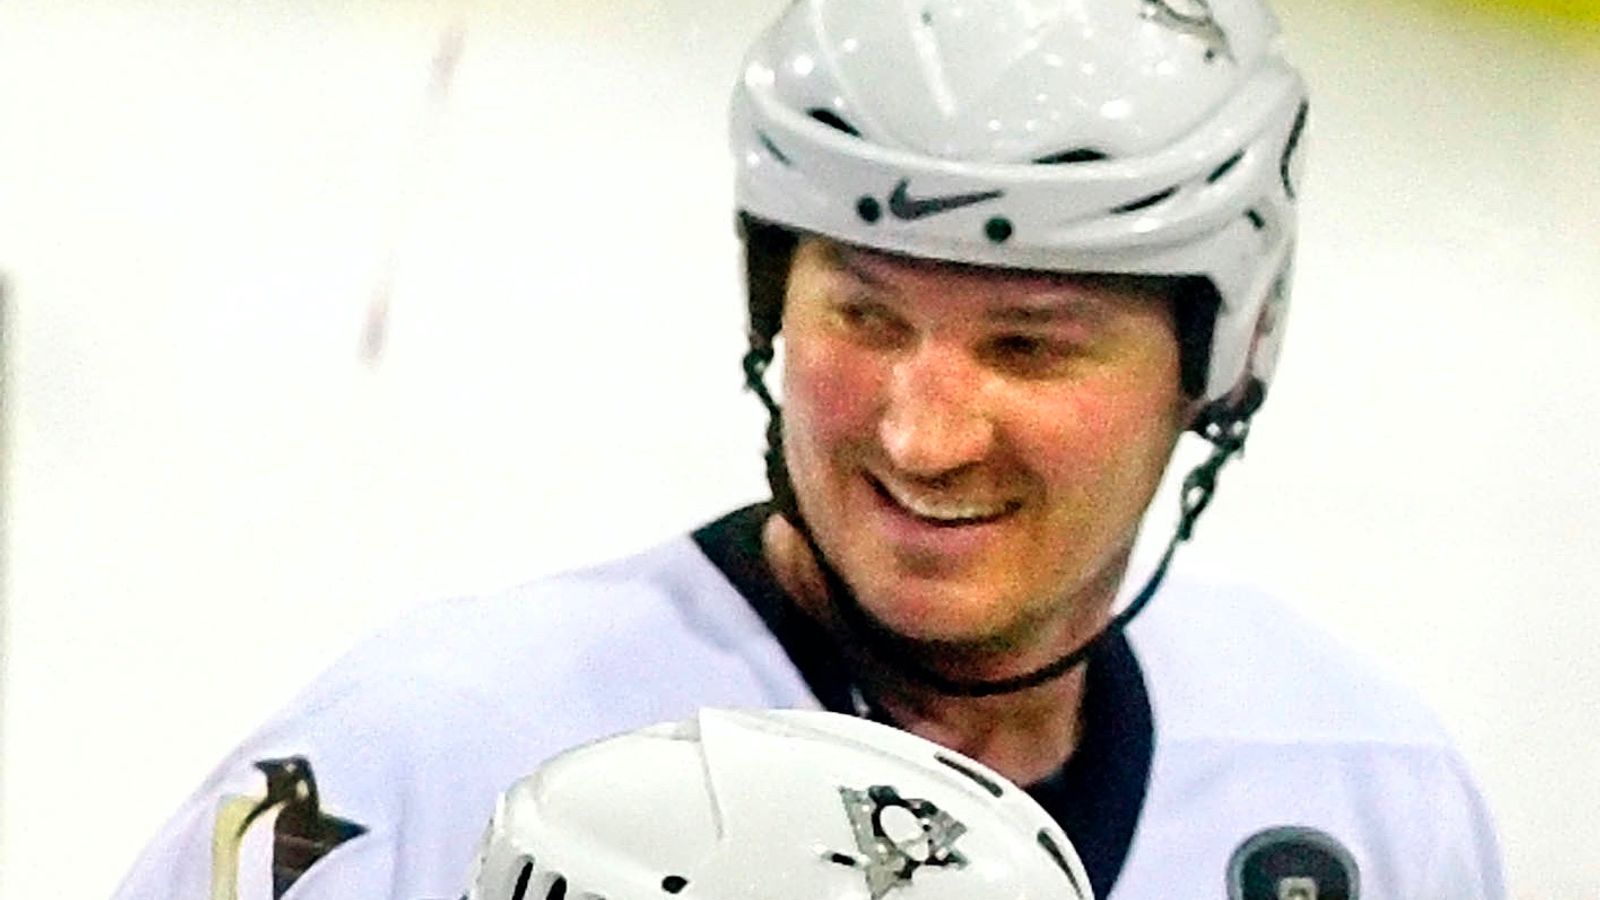 Mario Lemieux of the Pittsburgh Penguins skates with the puck as